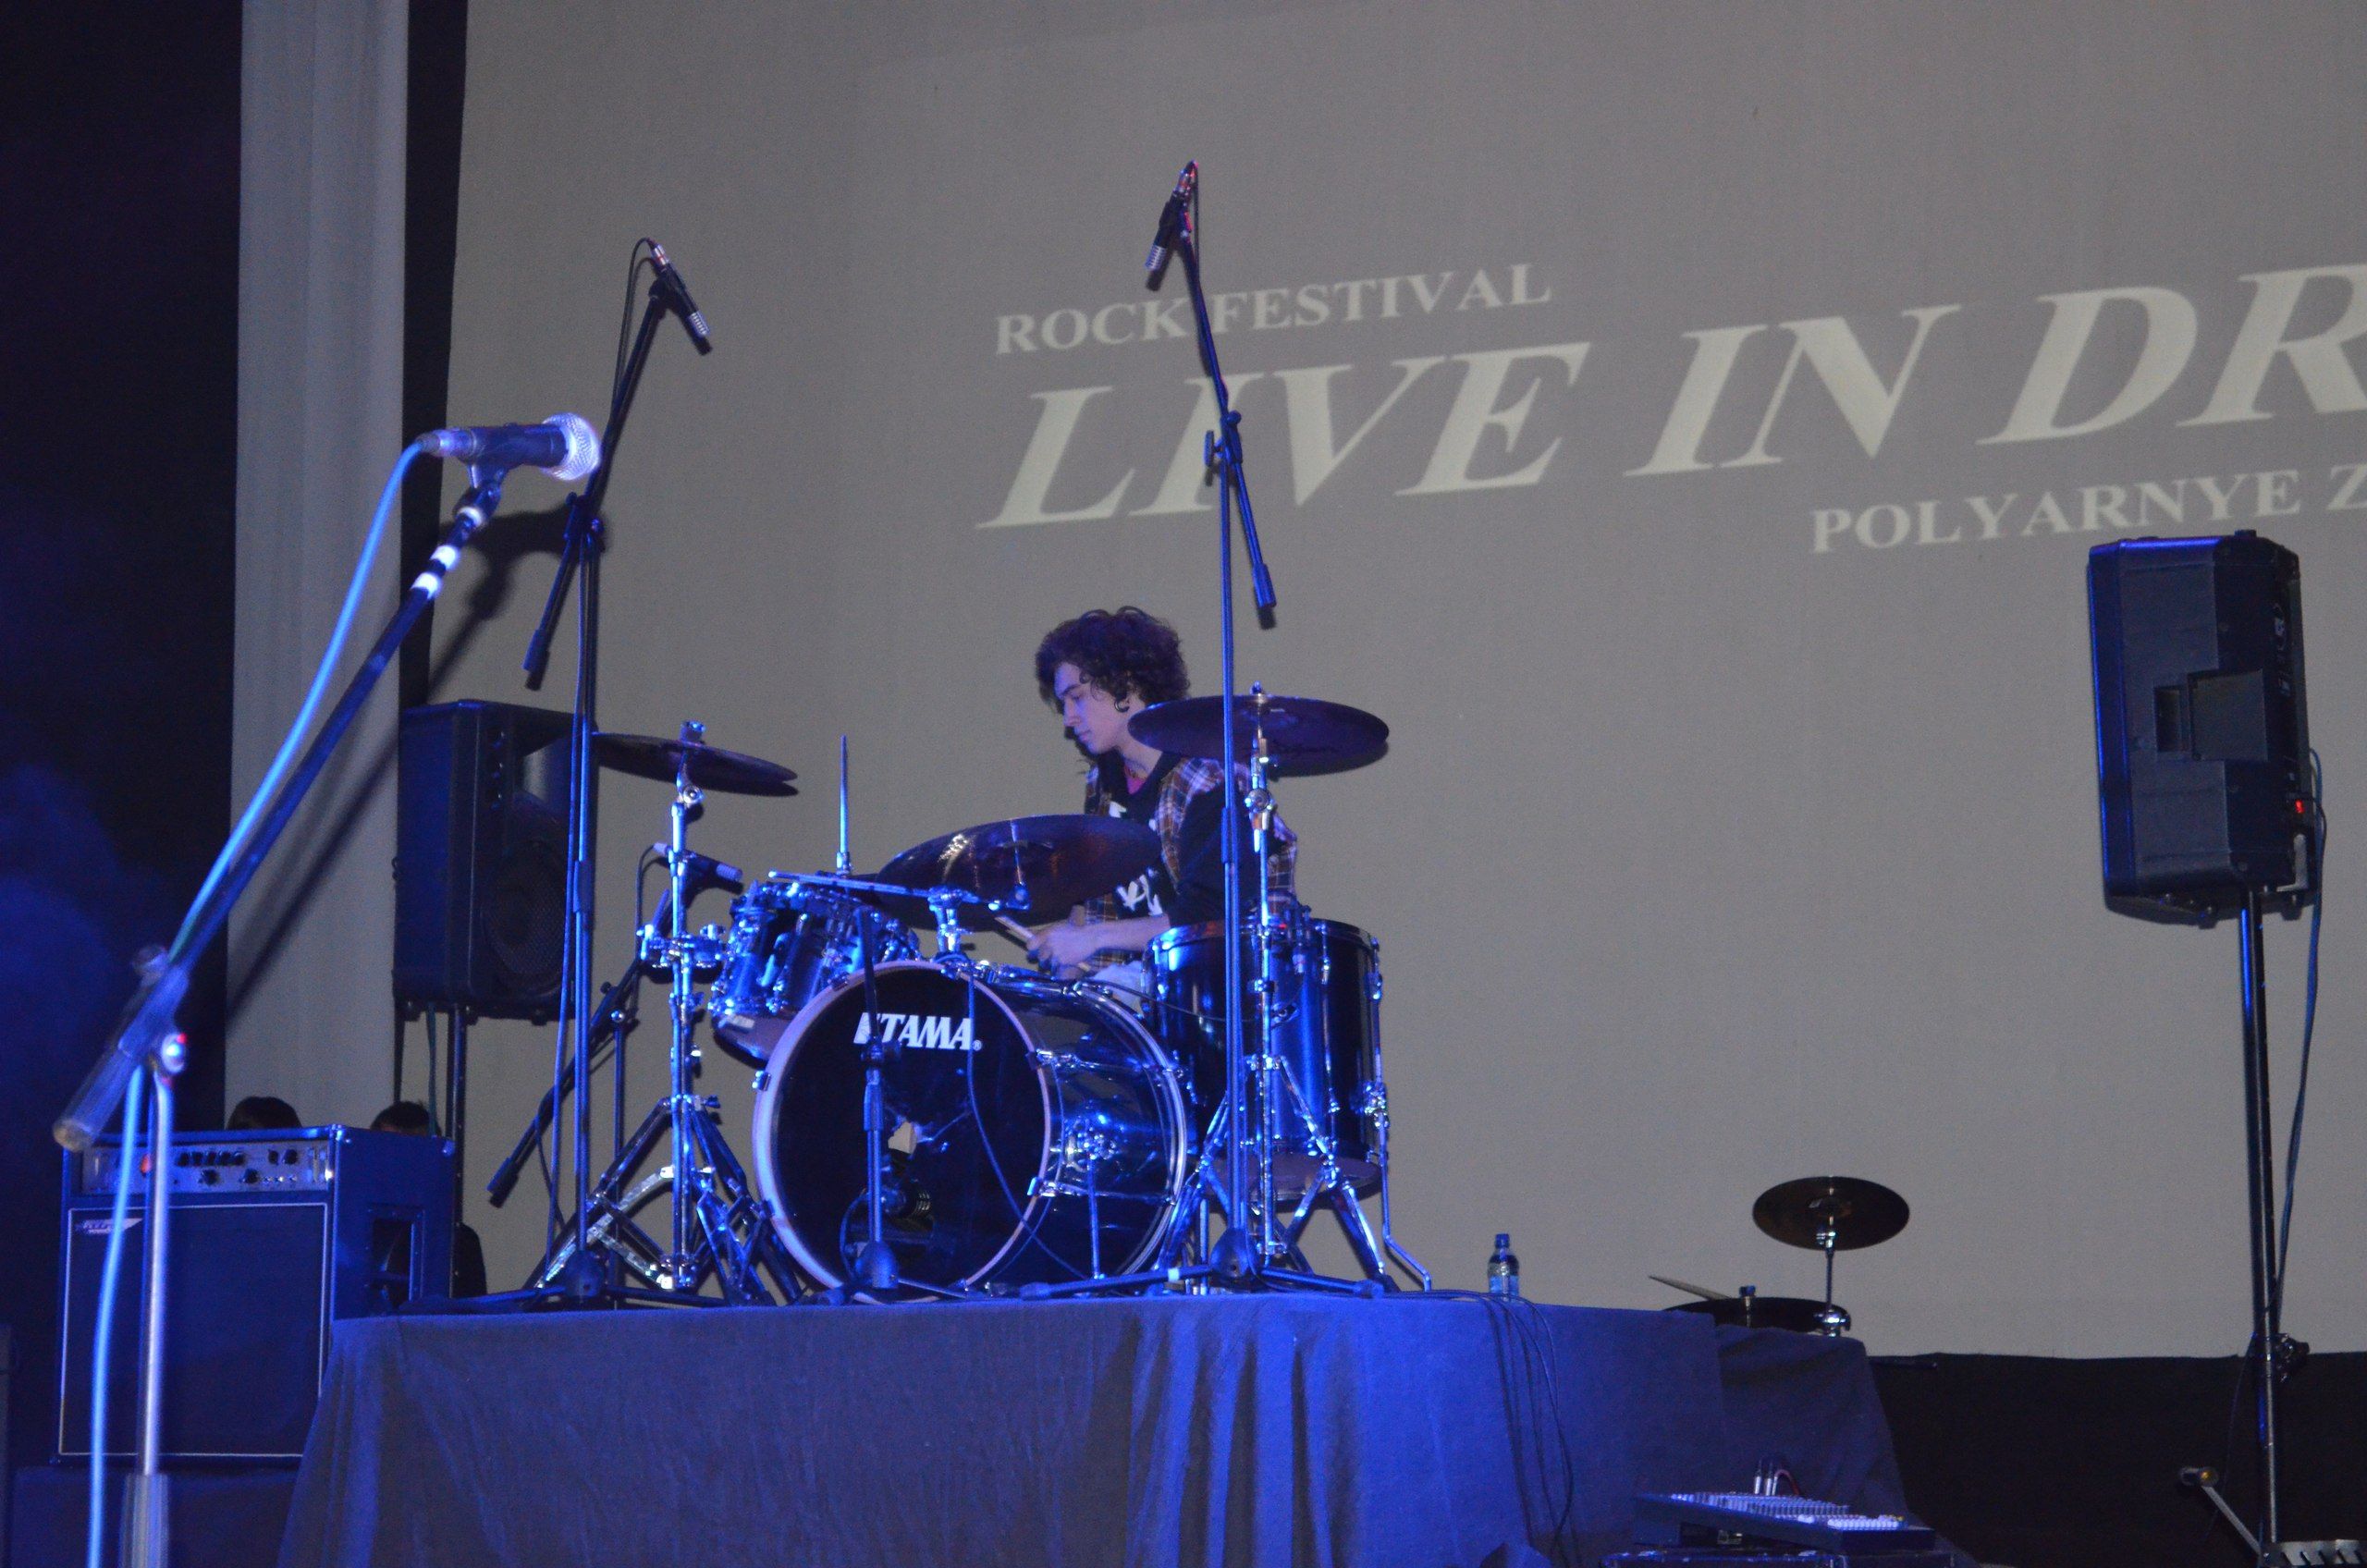 Live in Drive 2013 27